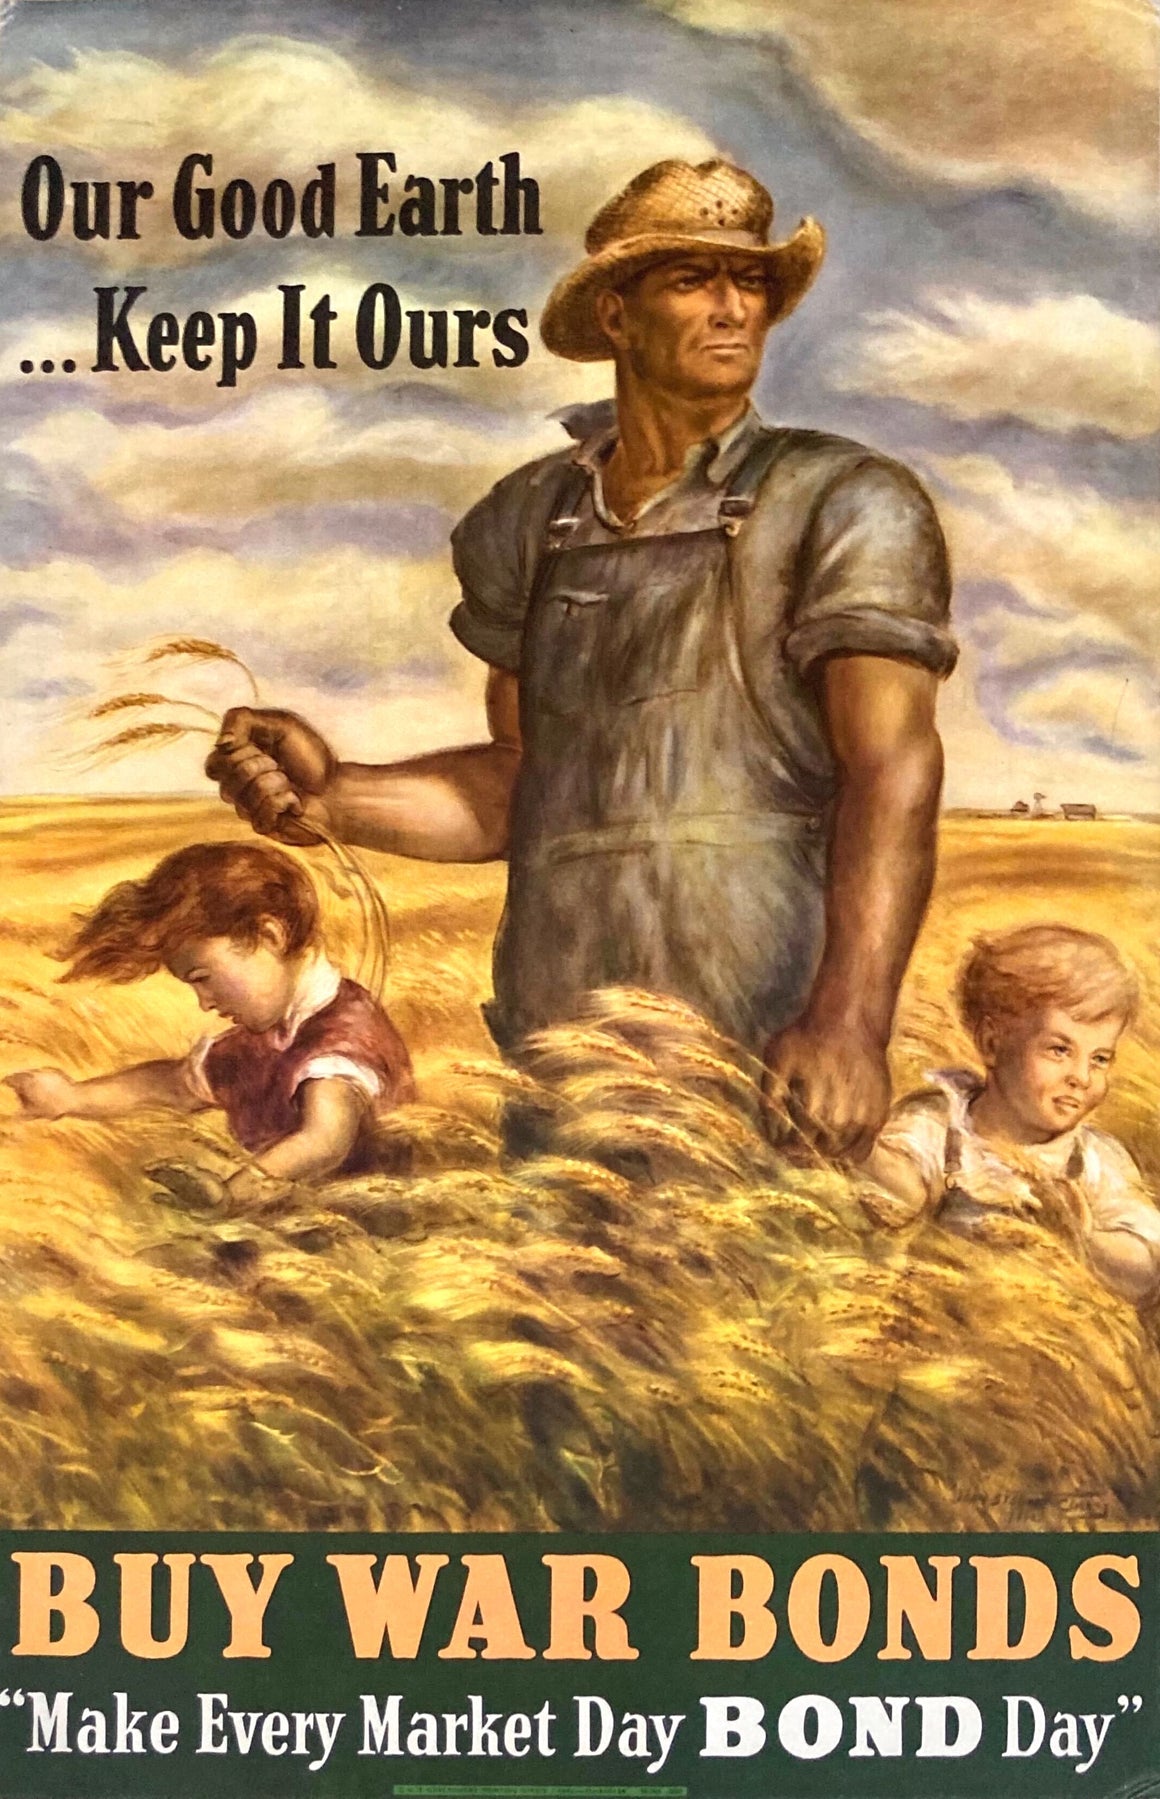 "Our Good Earth... Keep it Ours" Vintage WWII War Bonds Poster by John Steuart Curry, 1943